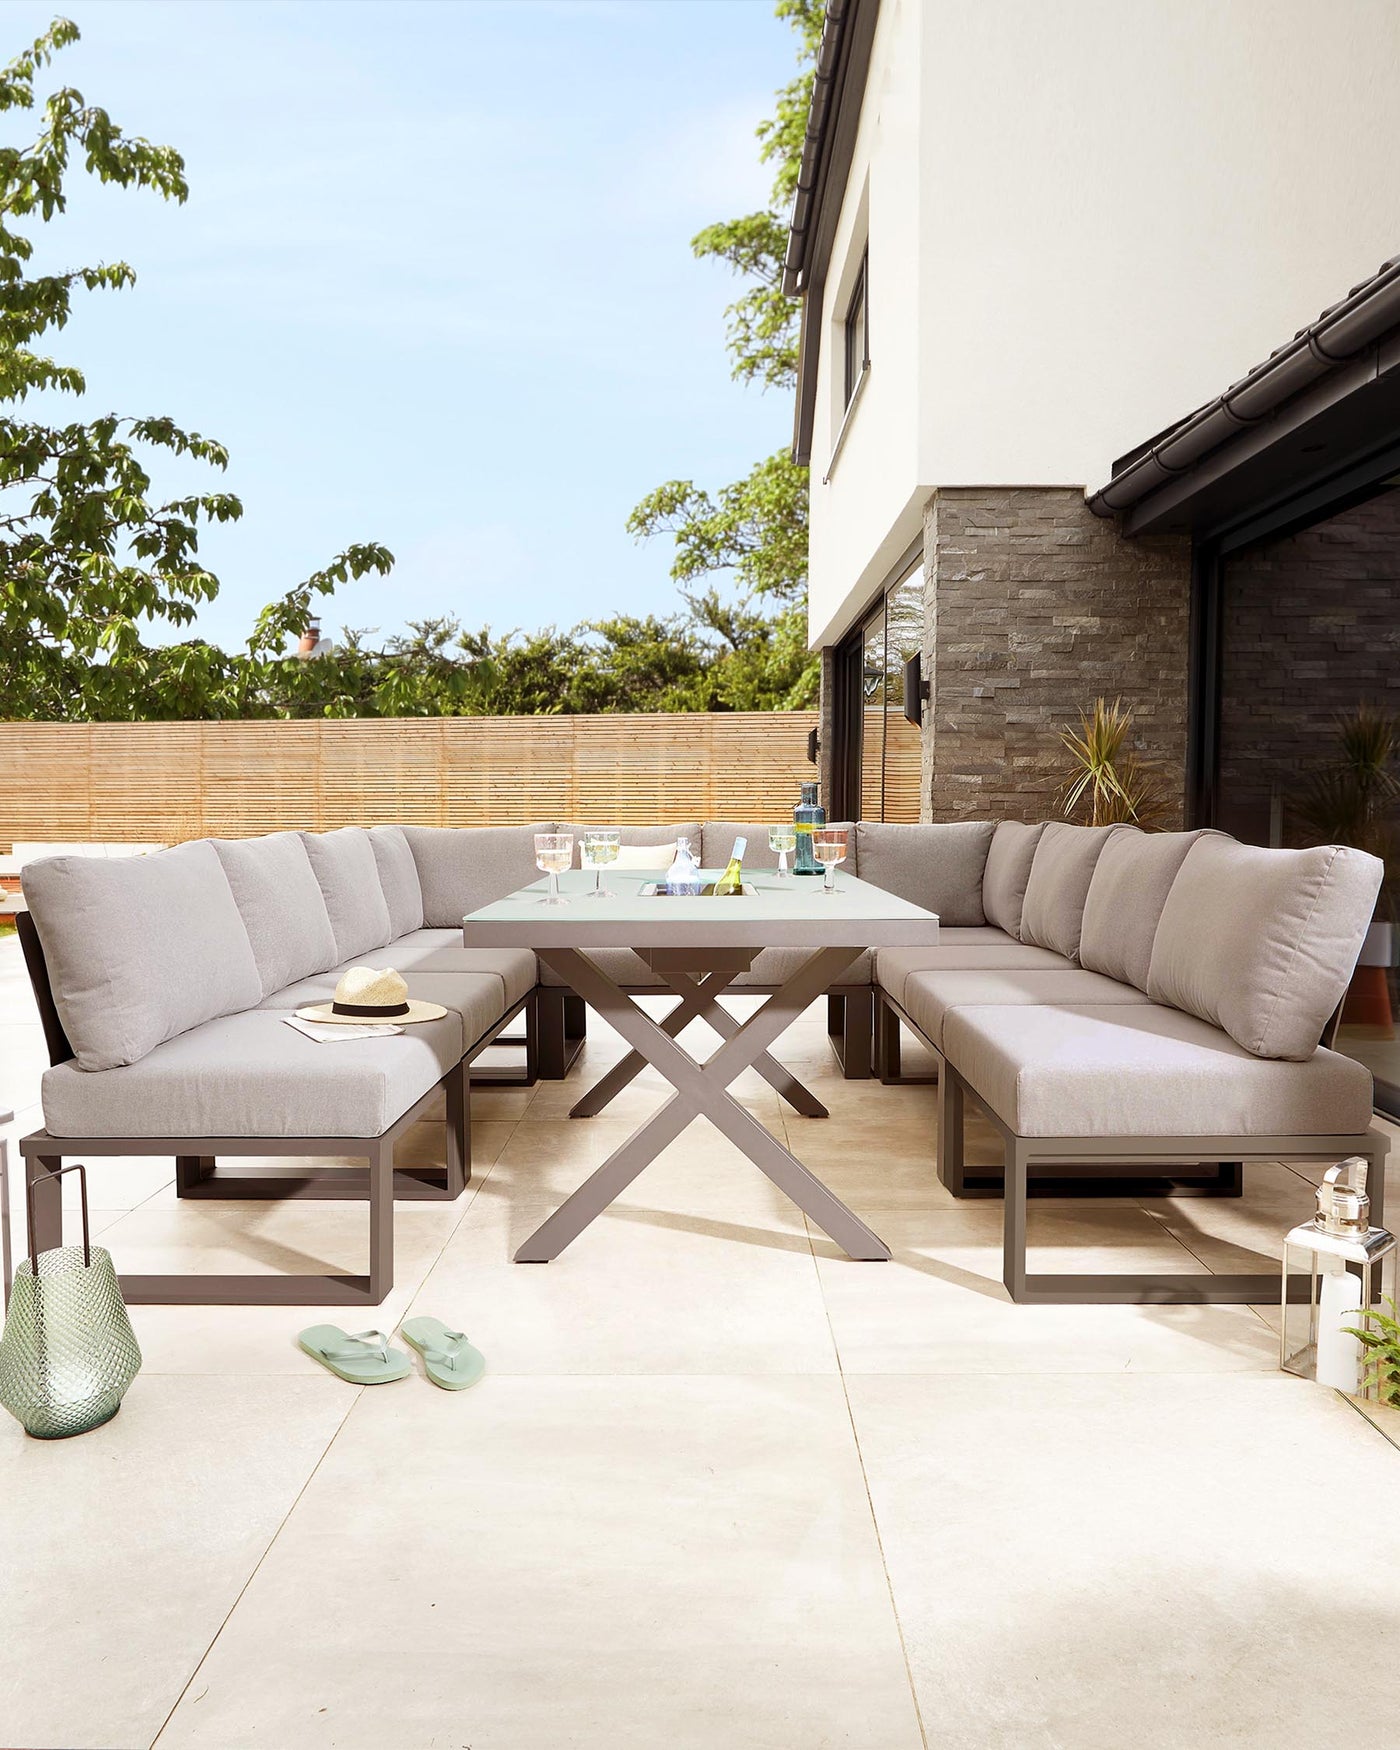 Outdoor furniture set featuring a modern rectangular dining table with a unique criss-cross leg design in a grey finish and a matching bench. The set also includes an L-shaped sectional sofa with plush cushions on a sleek grey frame, positioned on a neutral tiled patio, complemented by outdoor accessories.